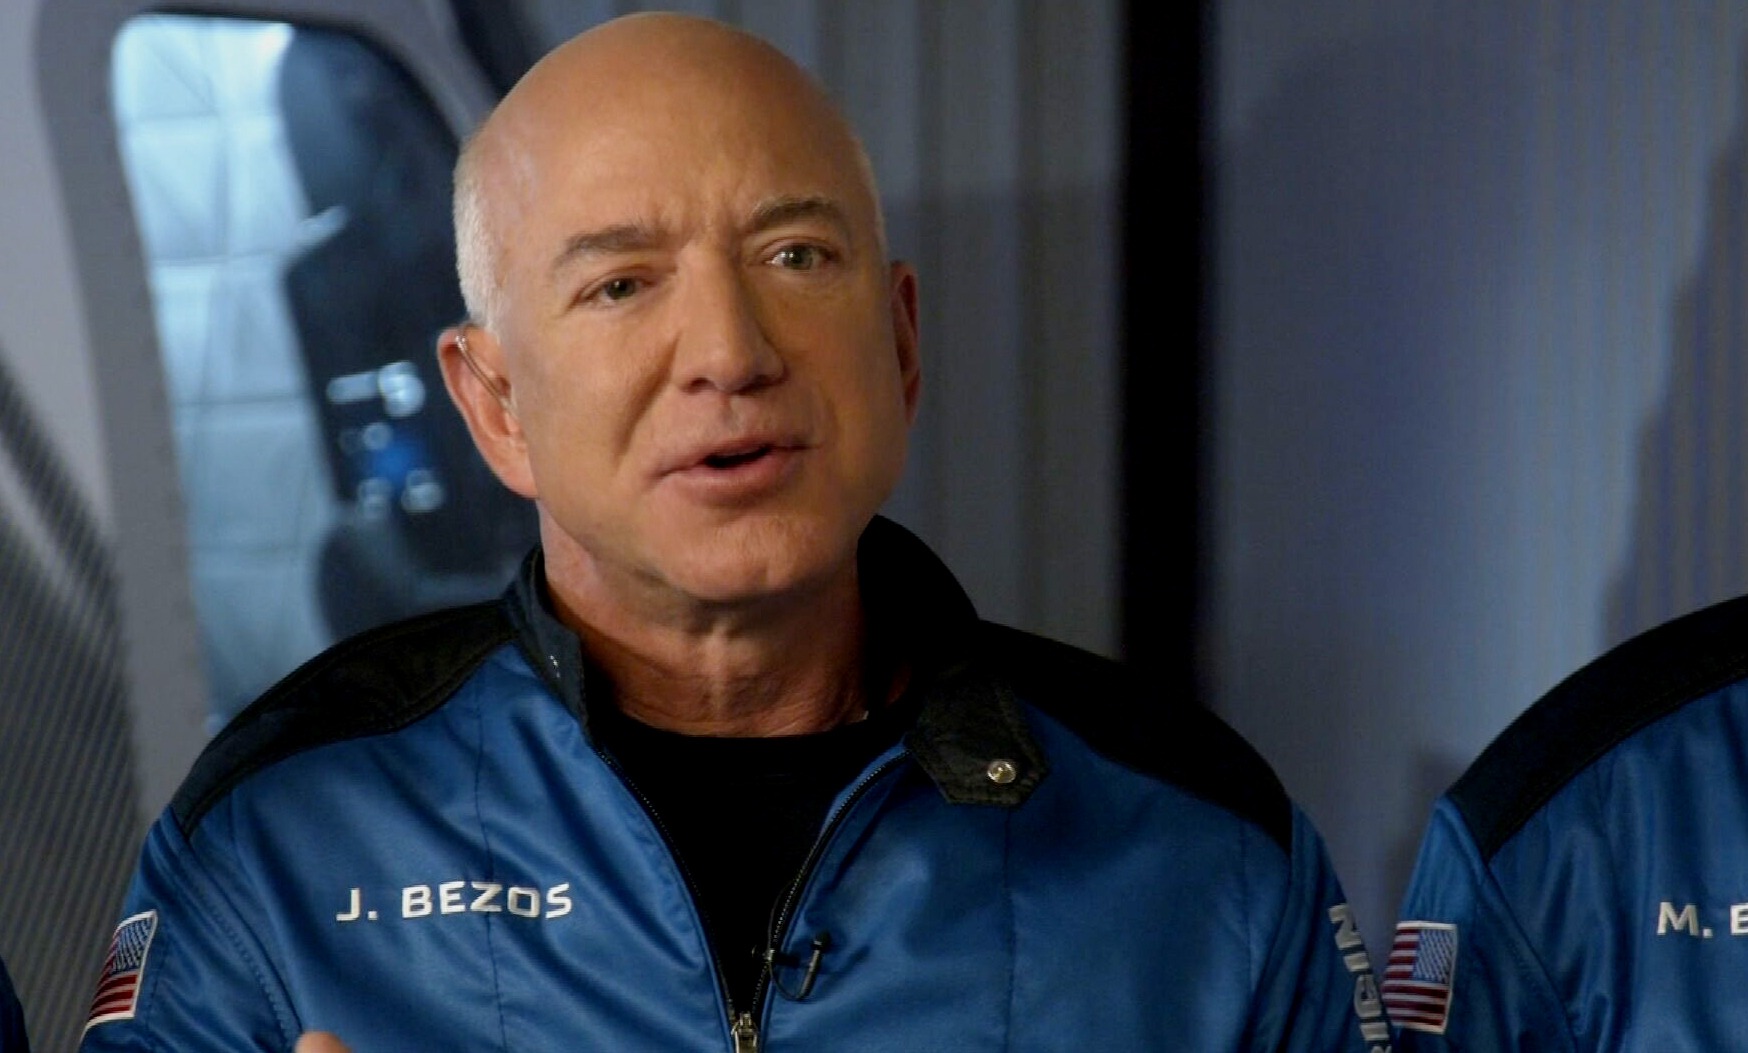 PHOTO: Jeff Bezos part of the crew members of Blue Origin's first crewed flight speaks out in an interview with "Good Morning America," July 19, 2021.